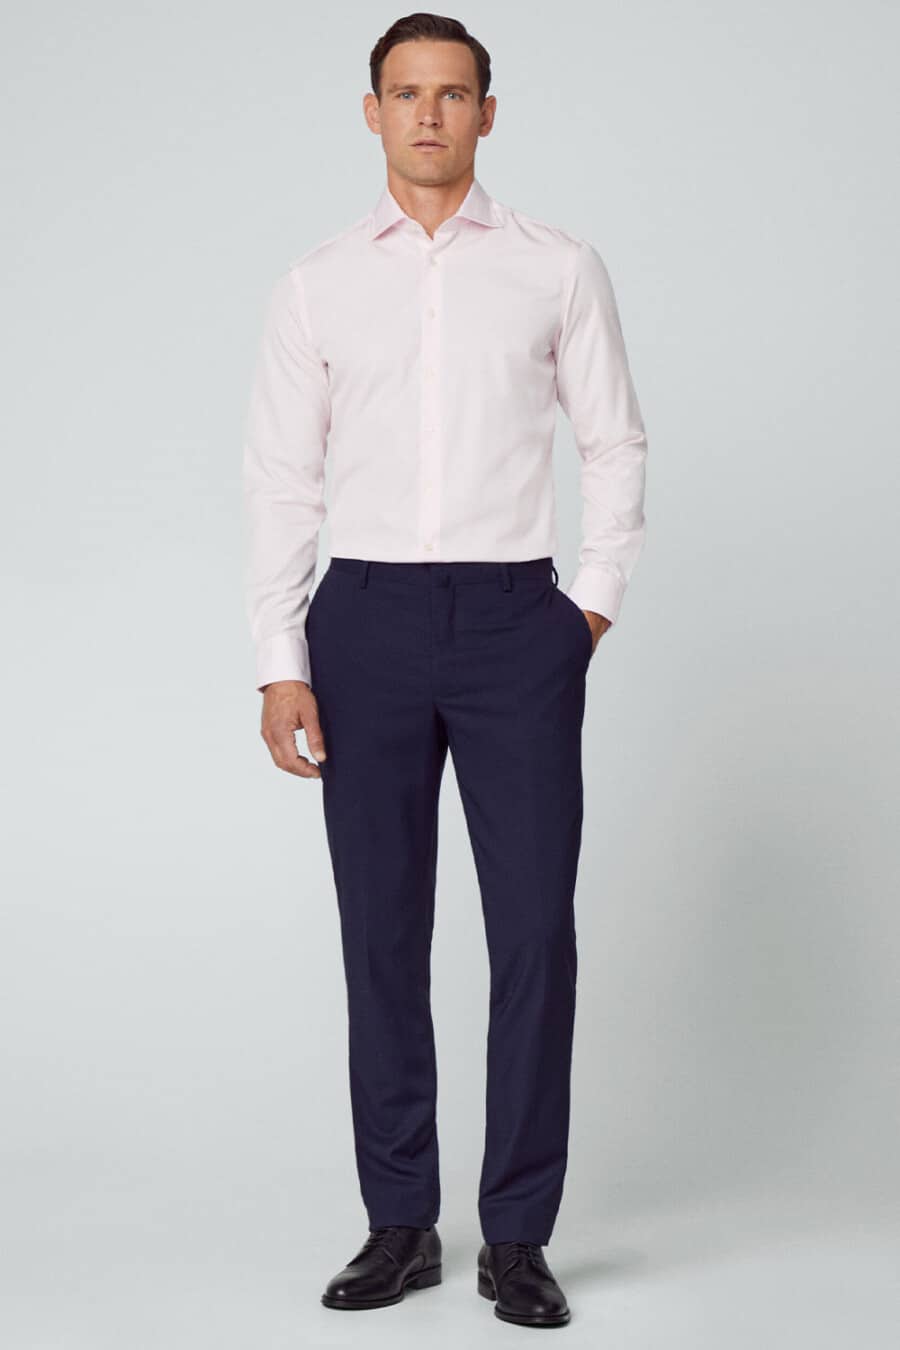 Men's navy tailored pants, light pink dress shirt and black leather derby shoes outfit